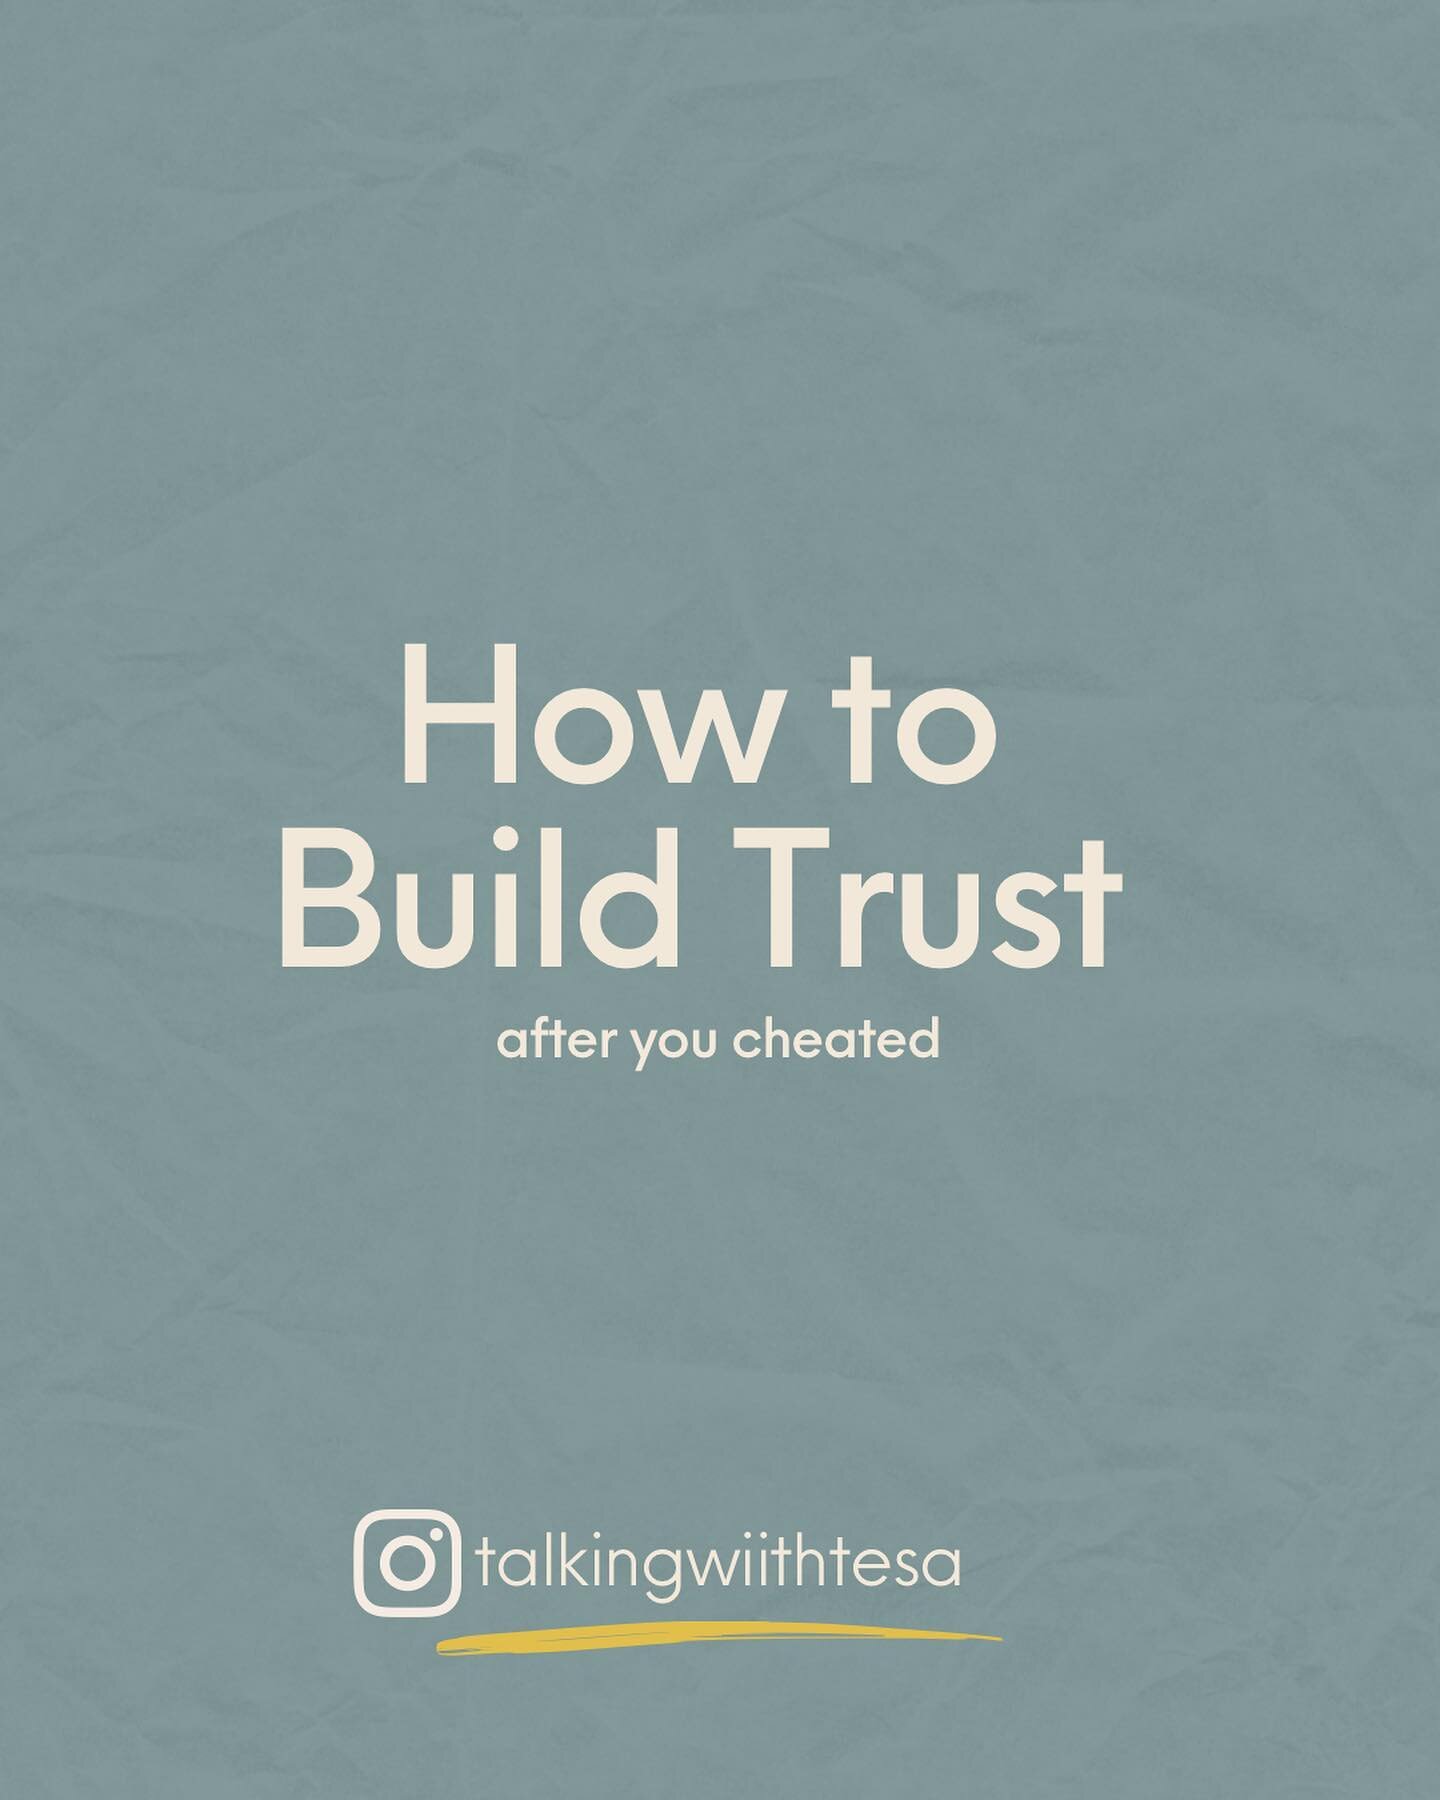 If you have cheated on your partner, it is important to take responsibility for your actions and work towards rebuilding trust. Here are some steps you can take to build trust after you have cheated:

1. Take responsibility for your actions

The firs